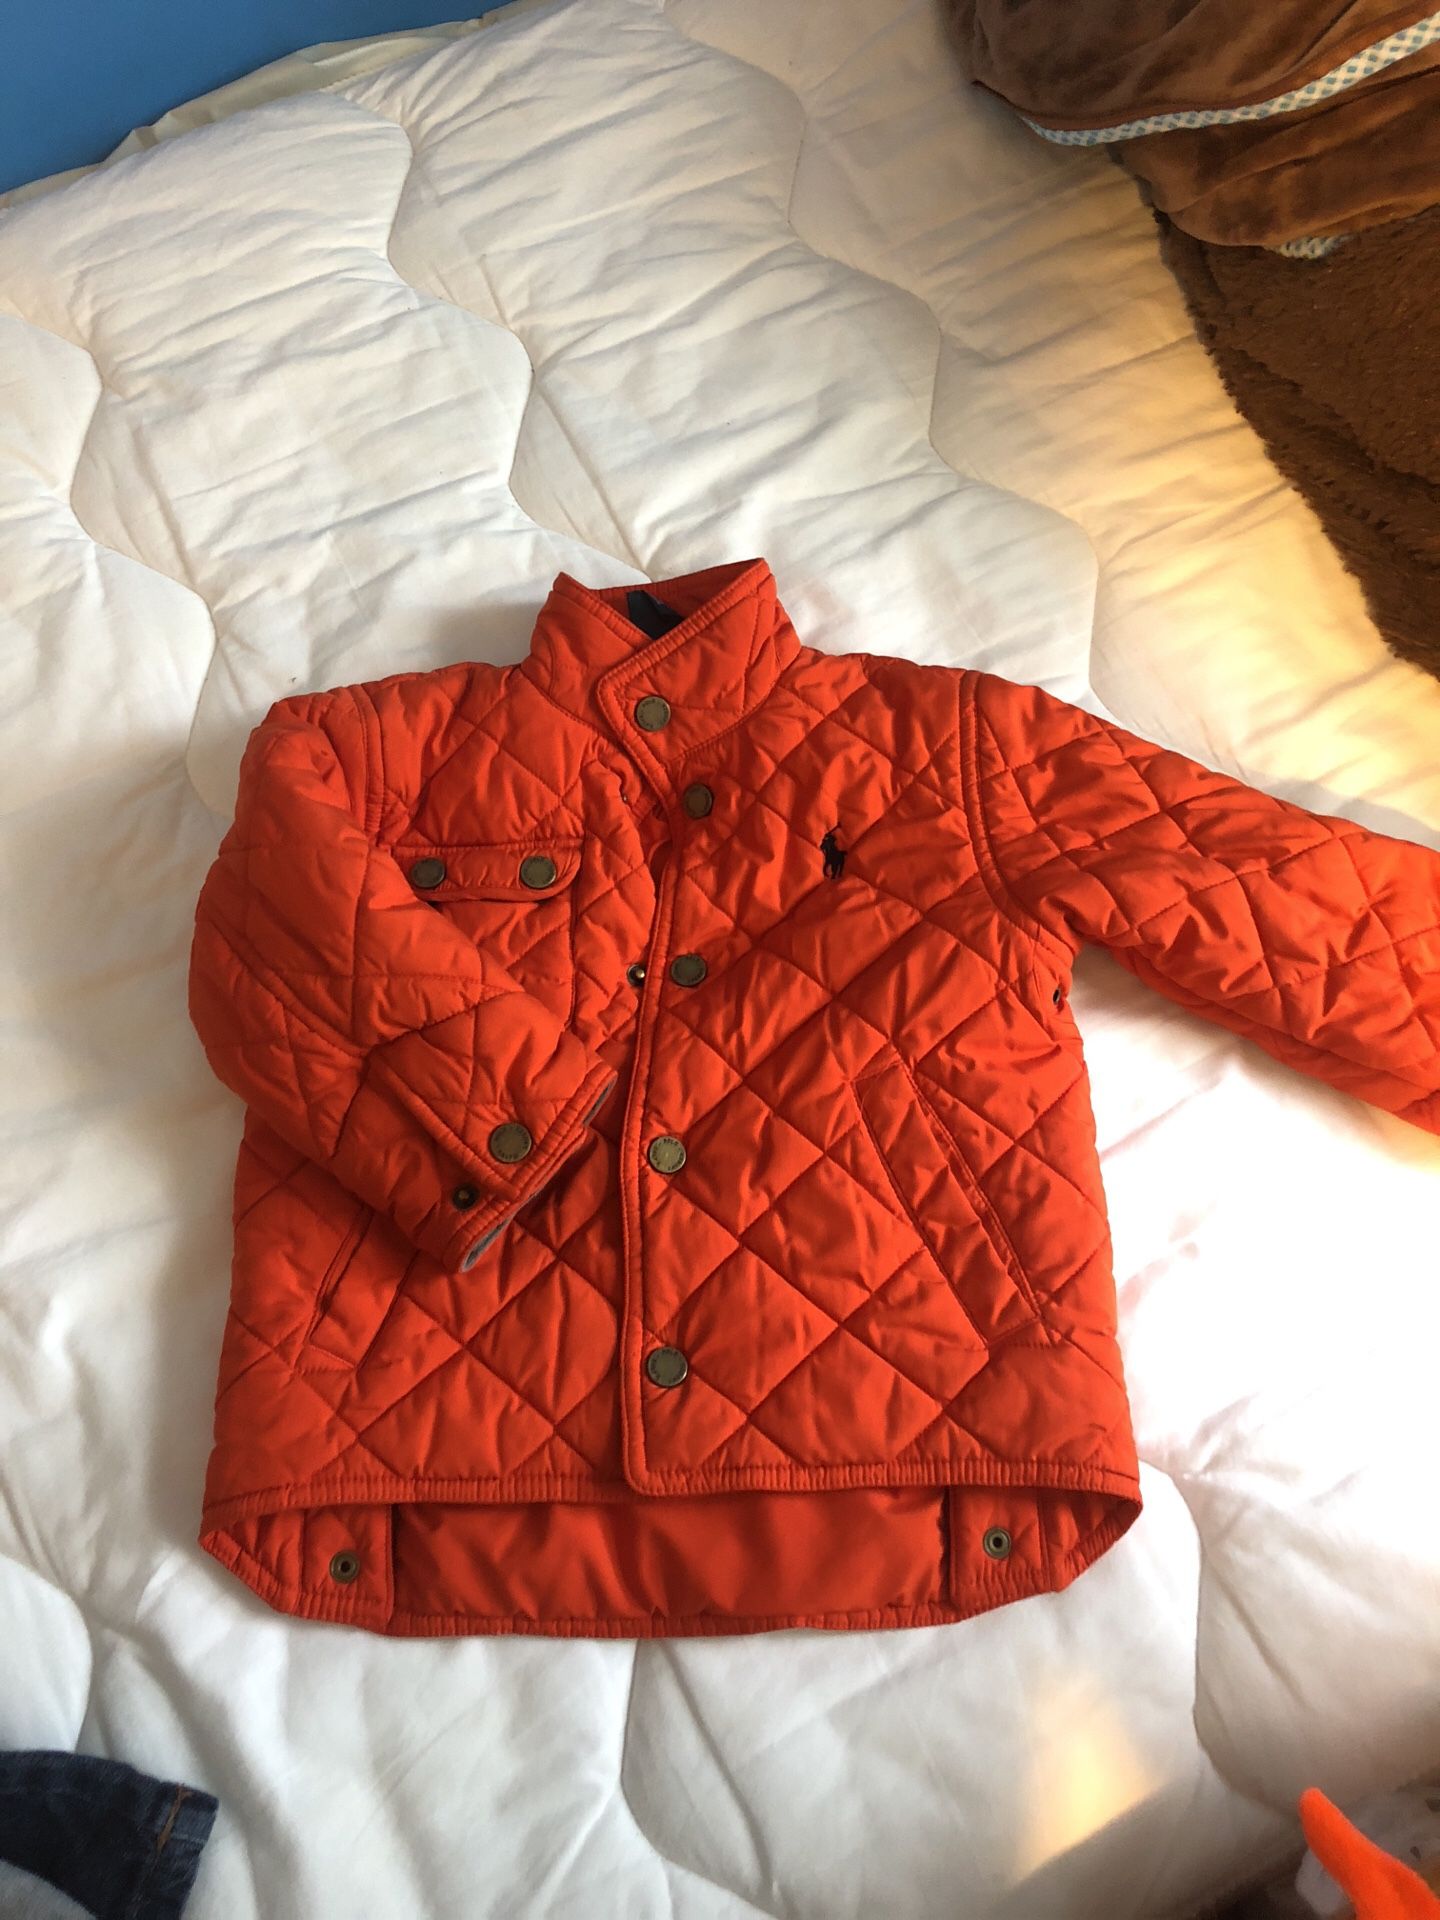 Polo by Ralph Lauren size 2T jacket